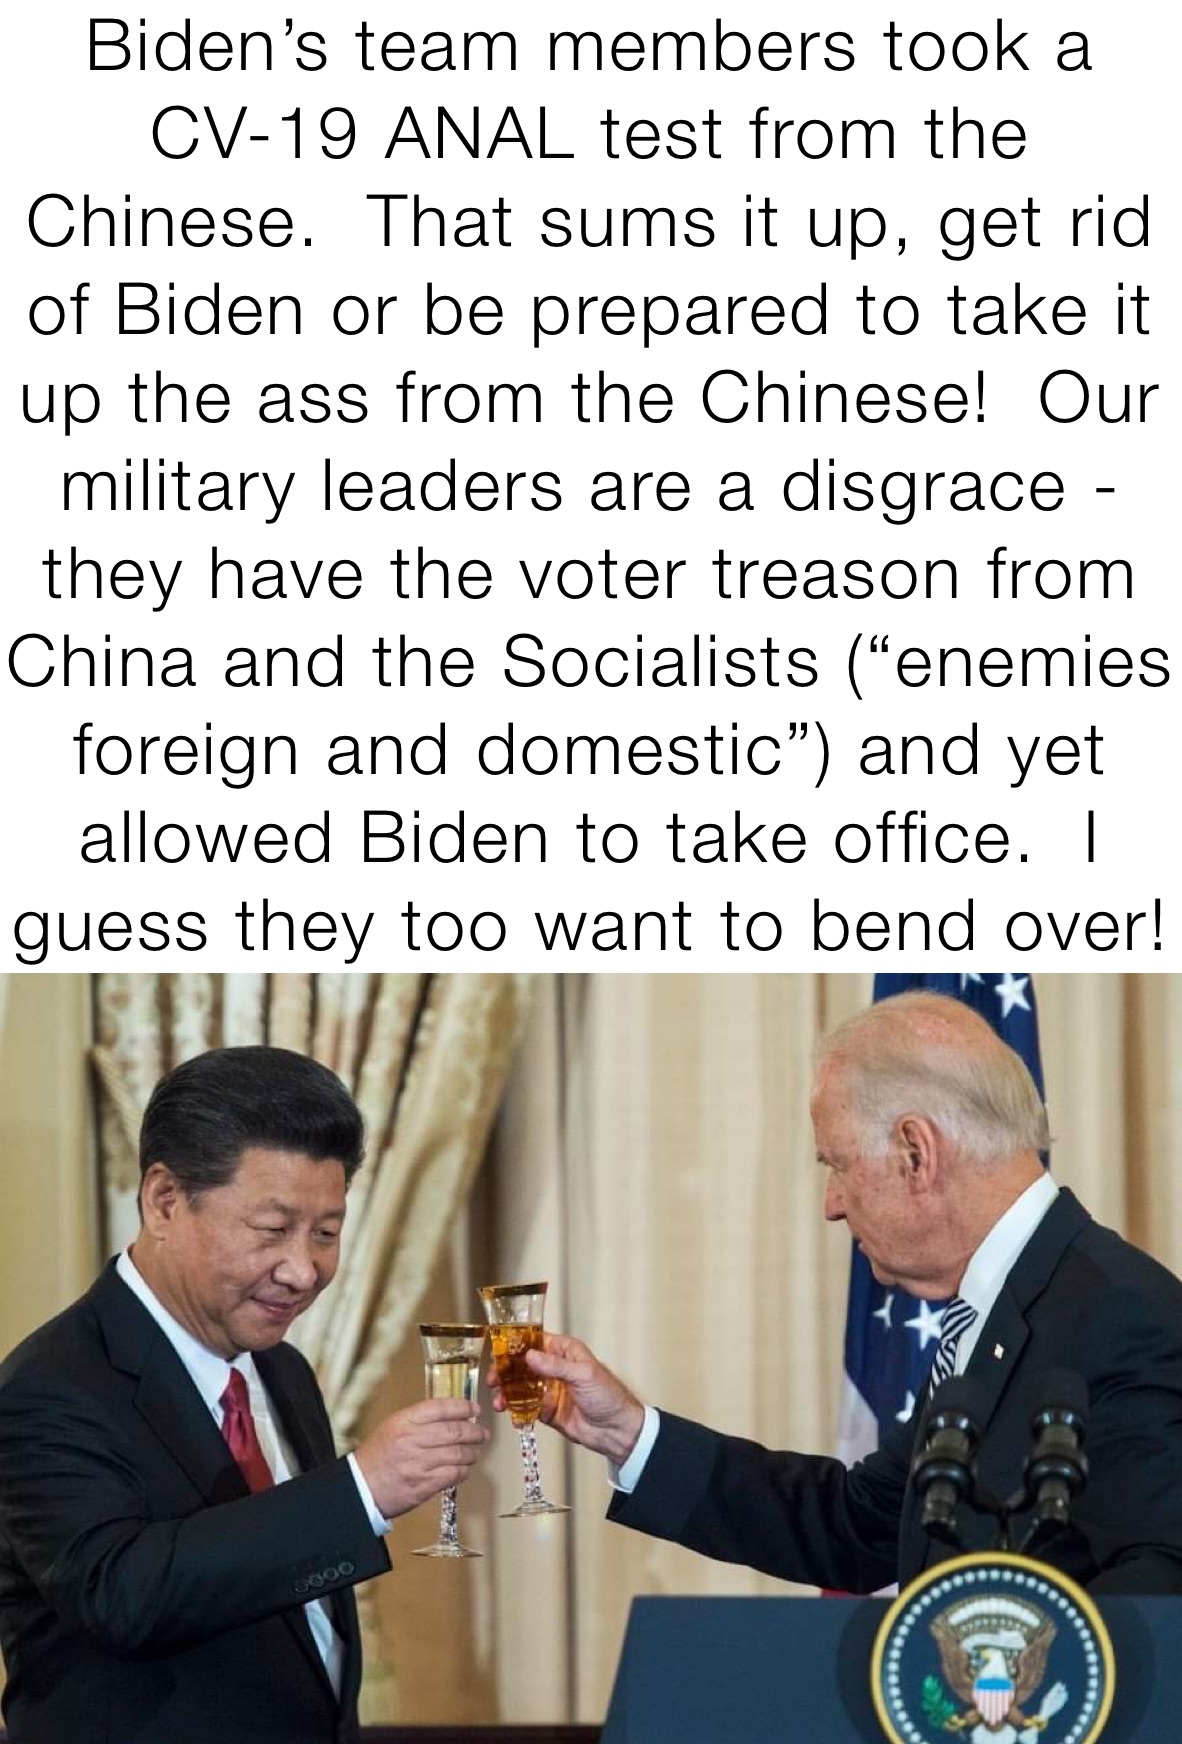 Biden’s team members took a CV-19 ANAL test from the Chinese.  That sums it up, get rid of Biden or be prepared to take it up the ass from the Chinese!  Our military leaders are a disgrace - they have the voter treason from China and the Socialists (“enemies foreign and domestic”) and yet allowed Biden to take office.  I guess they too want to bend over!